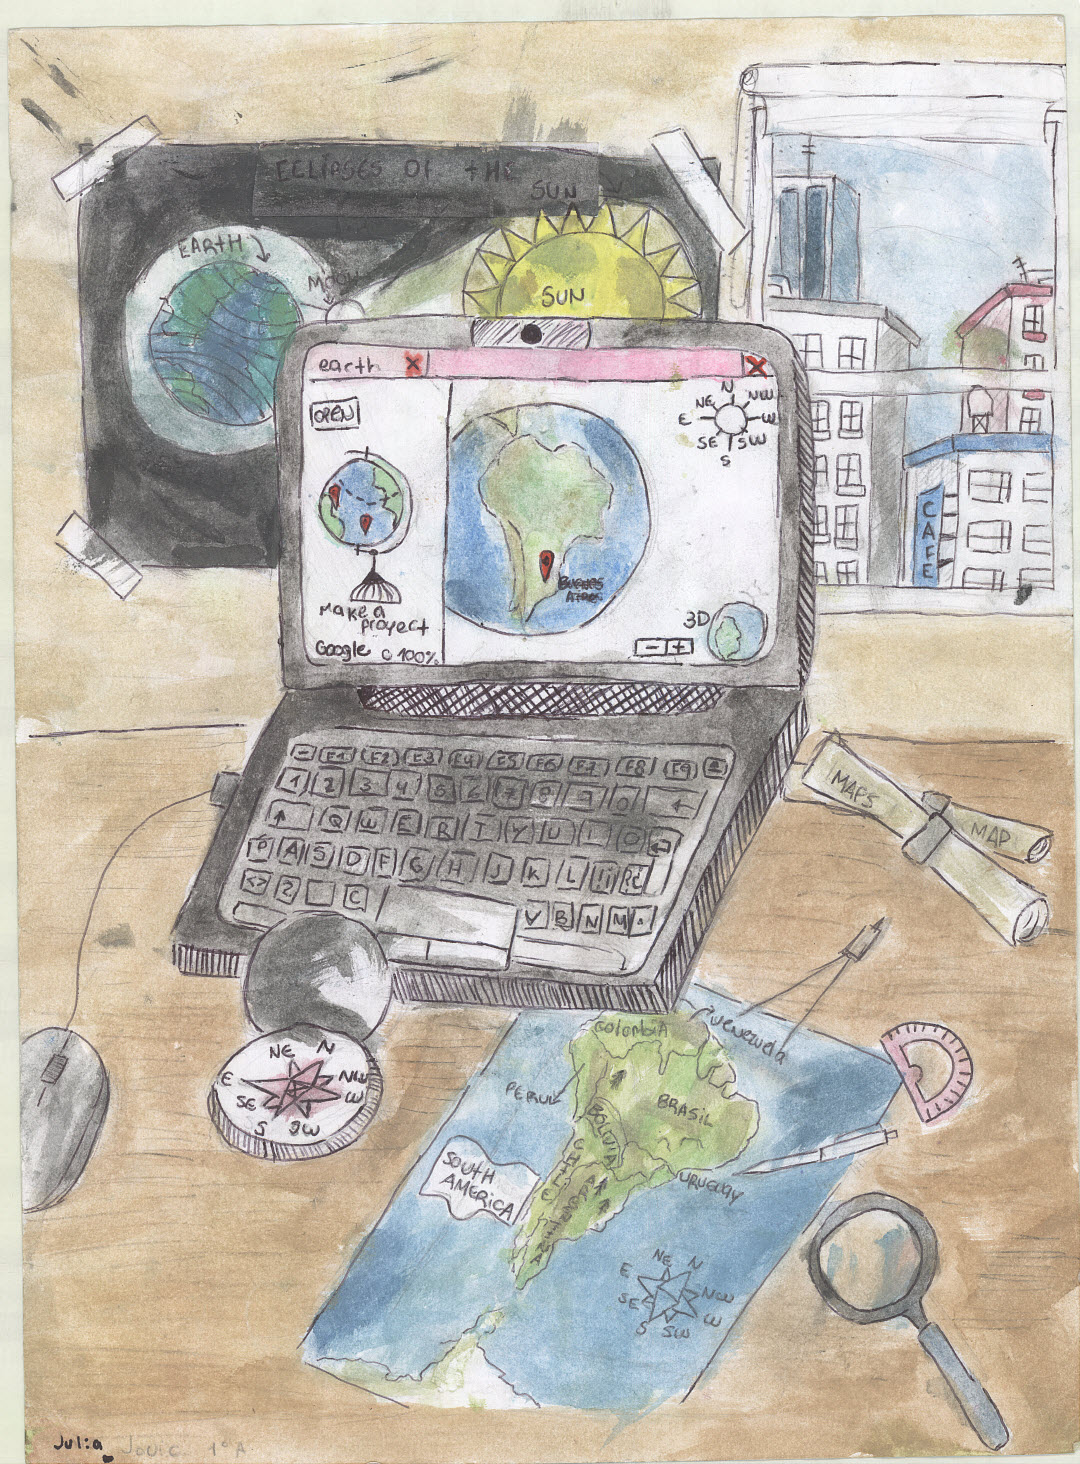 Map showing a laptop with a Google map image, the sun, map tools